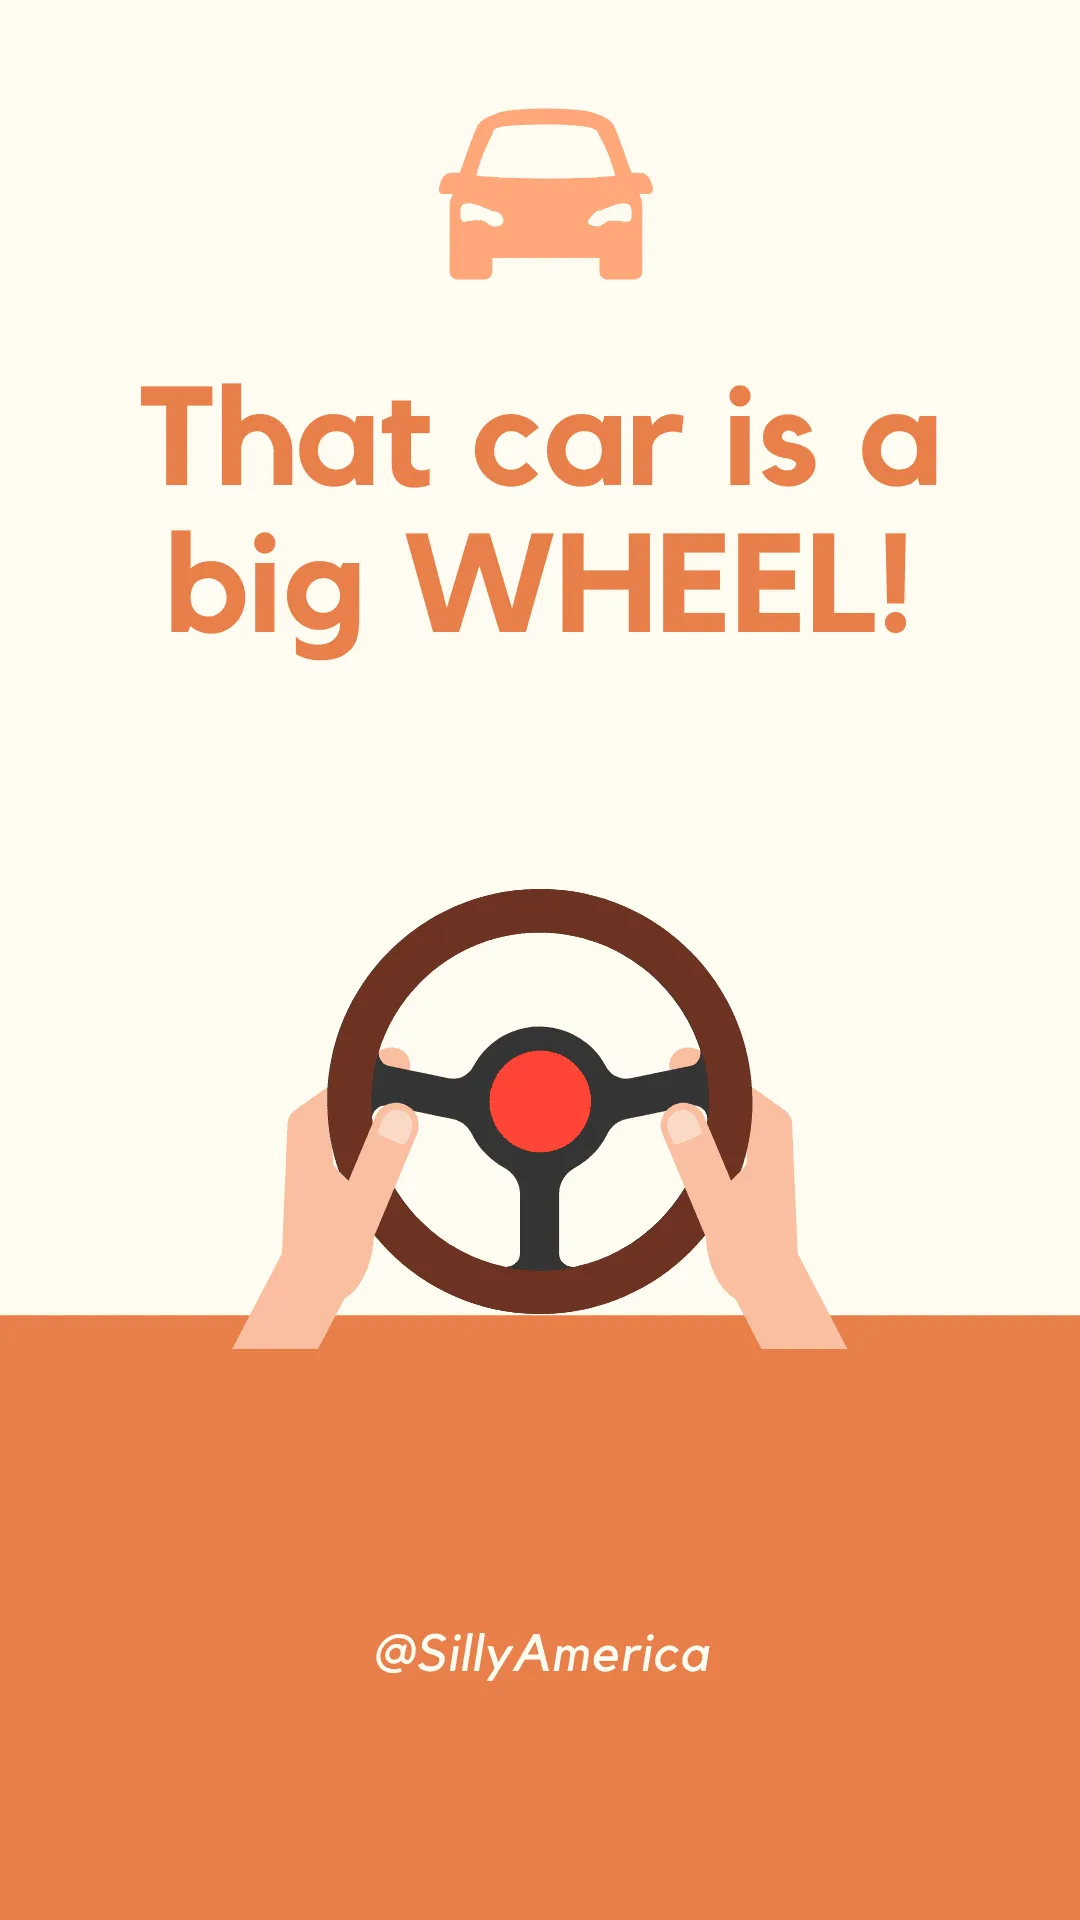 That car is a big WHEEL! - Car Puns to fuel your road trip content!